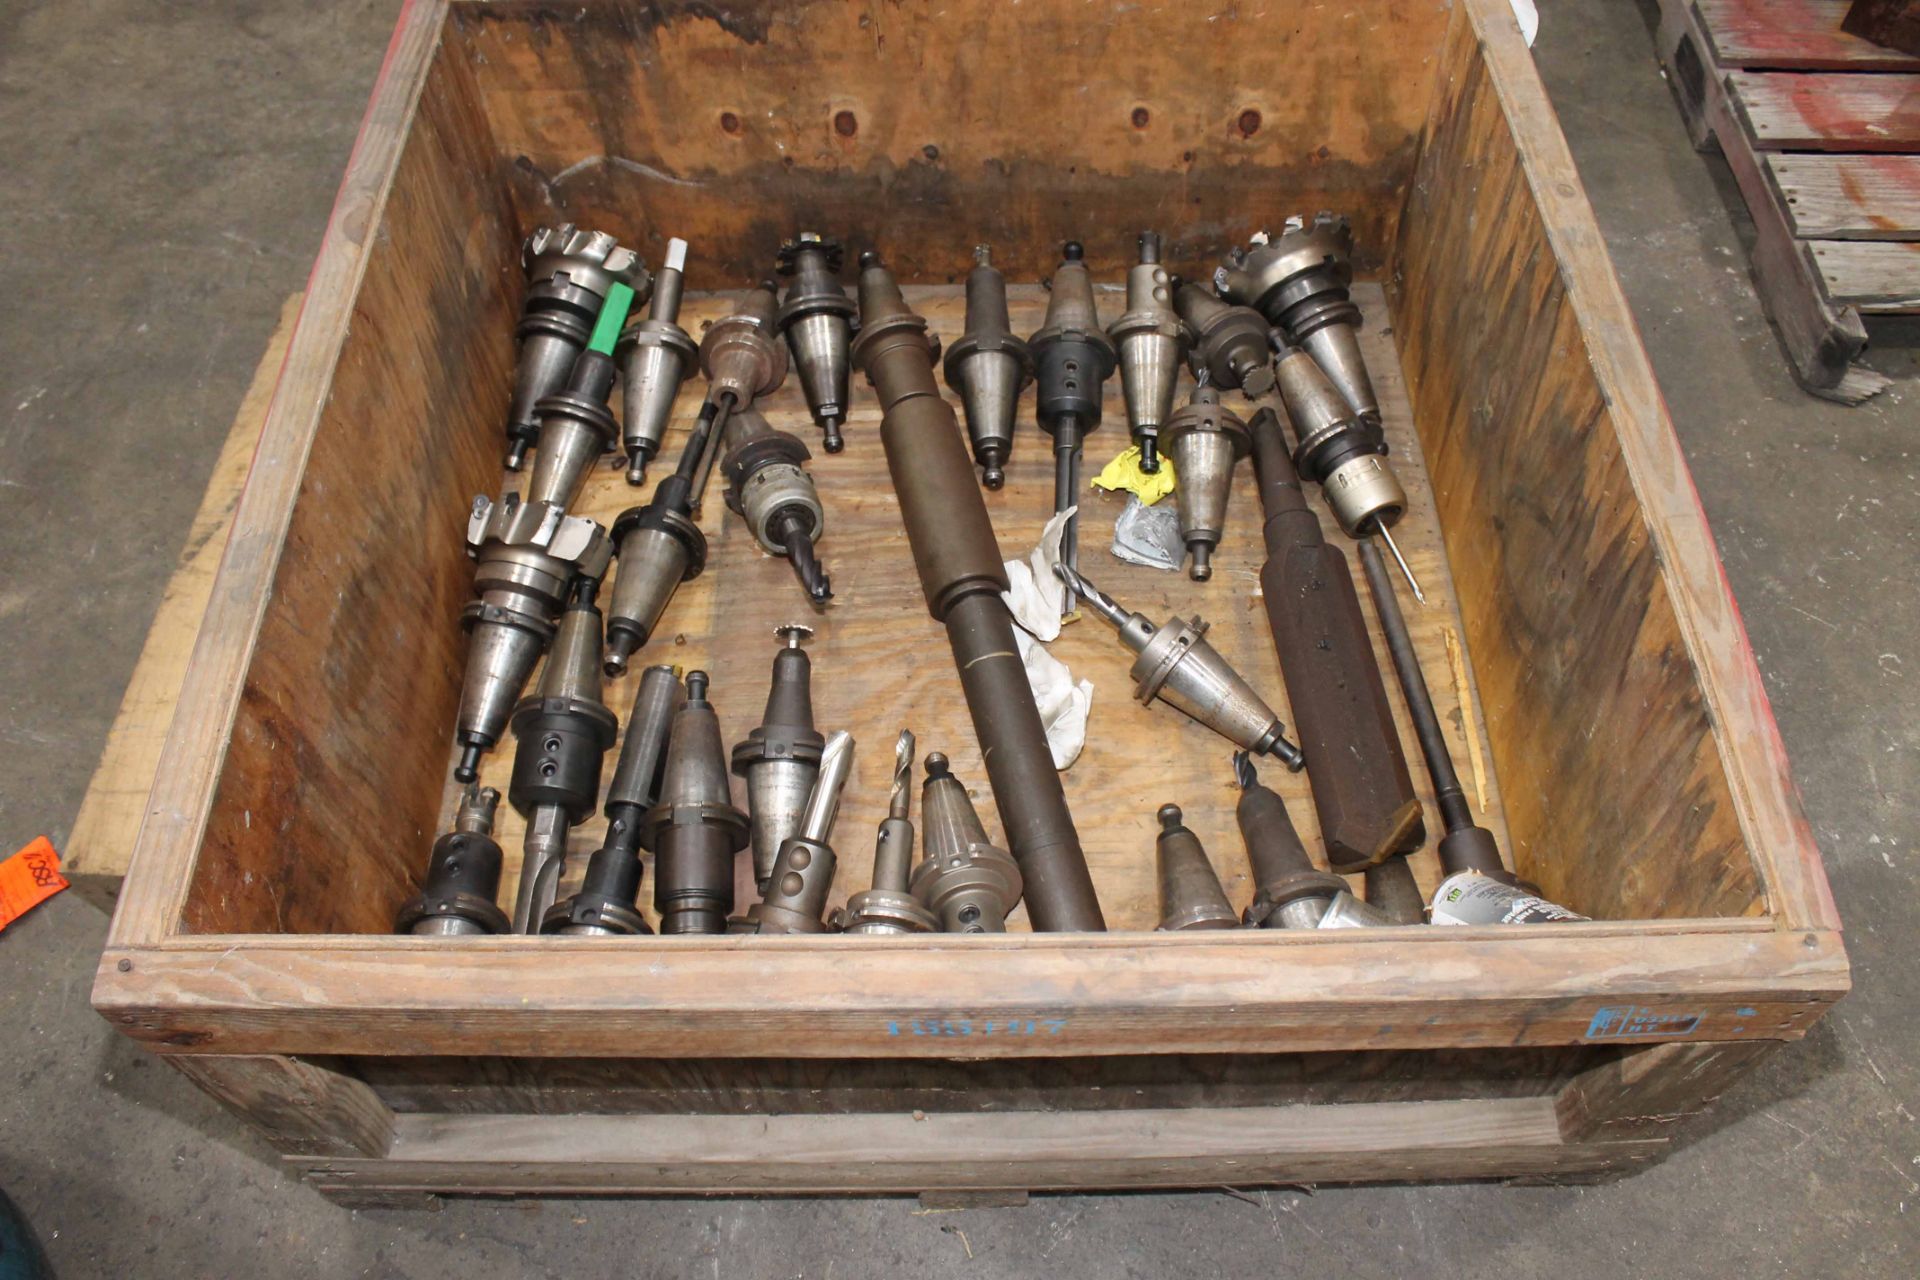 LOT CONSISTING OF: 50 taper toolholders & some boring bars (Location B - Cypress, TX) - Image 2 of 3